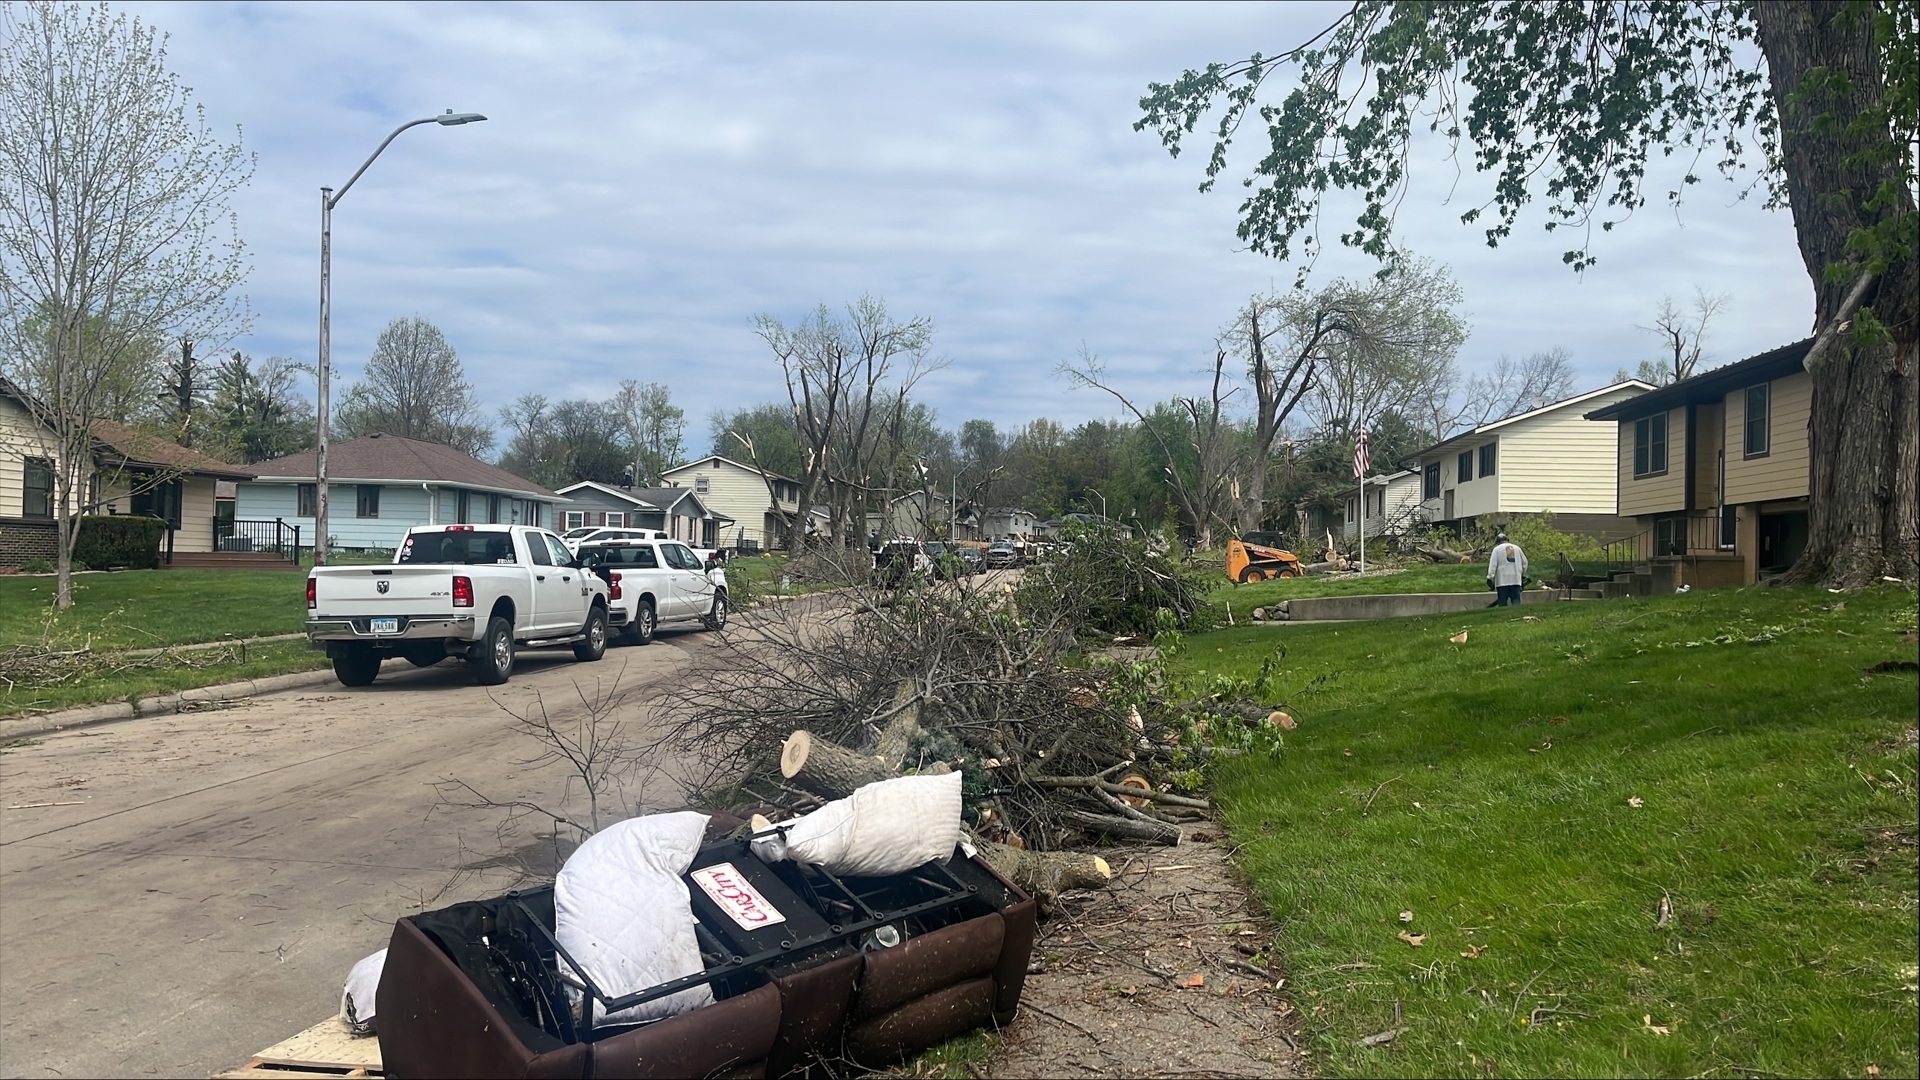 One person was hospitalized with nonlife-threatening injuries after a tornado came through Pleasant Hill, Iowa on Friday night.